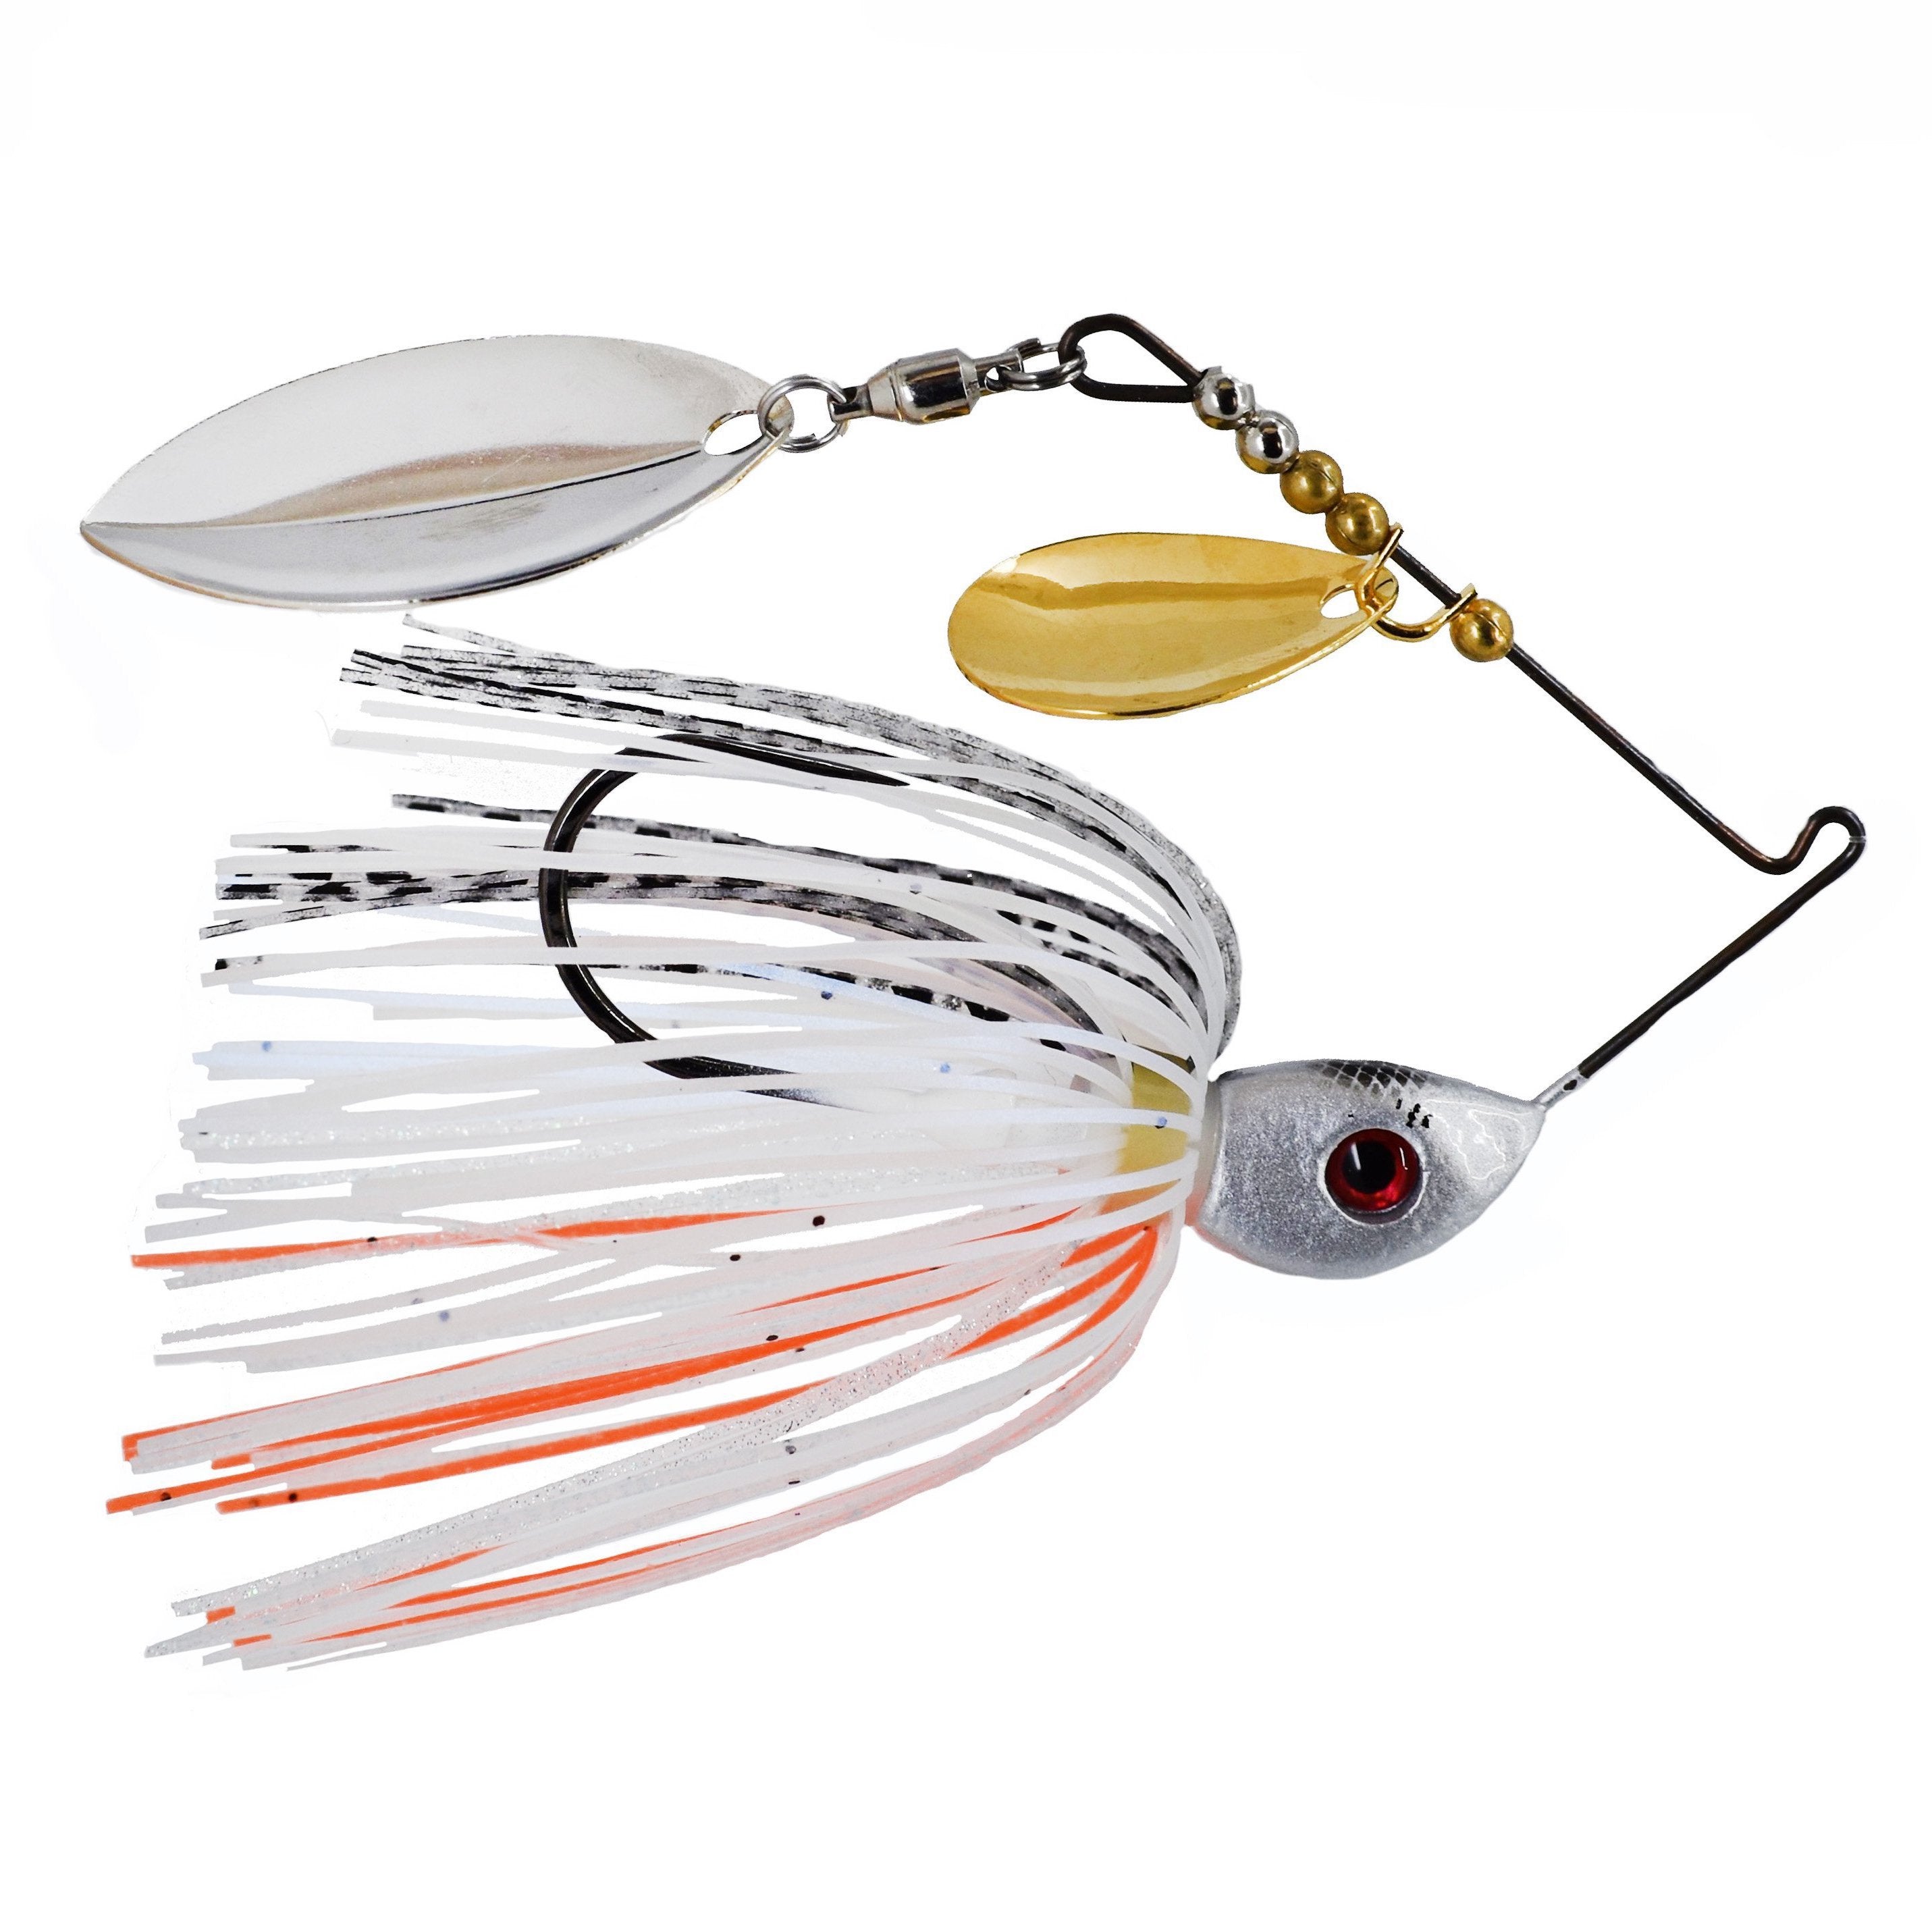 Spinnerbait - Selecting the Best Spinnerbait Blades